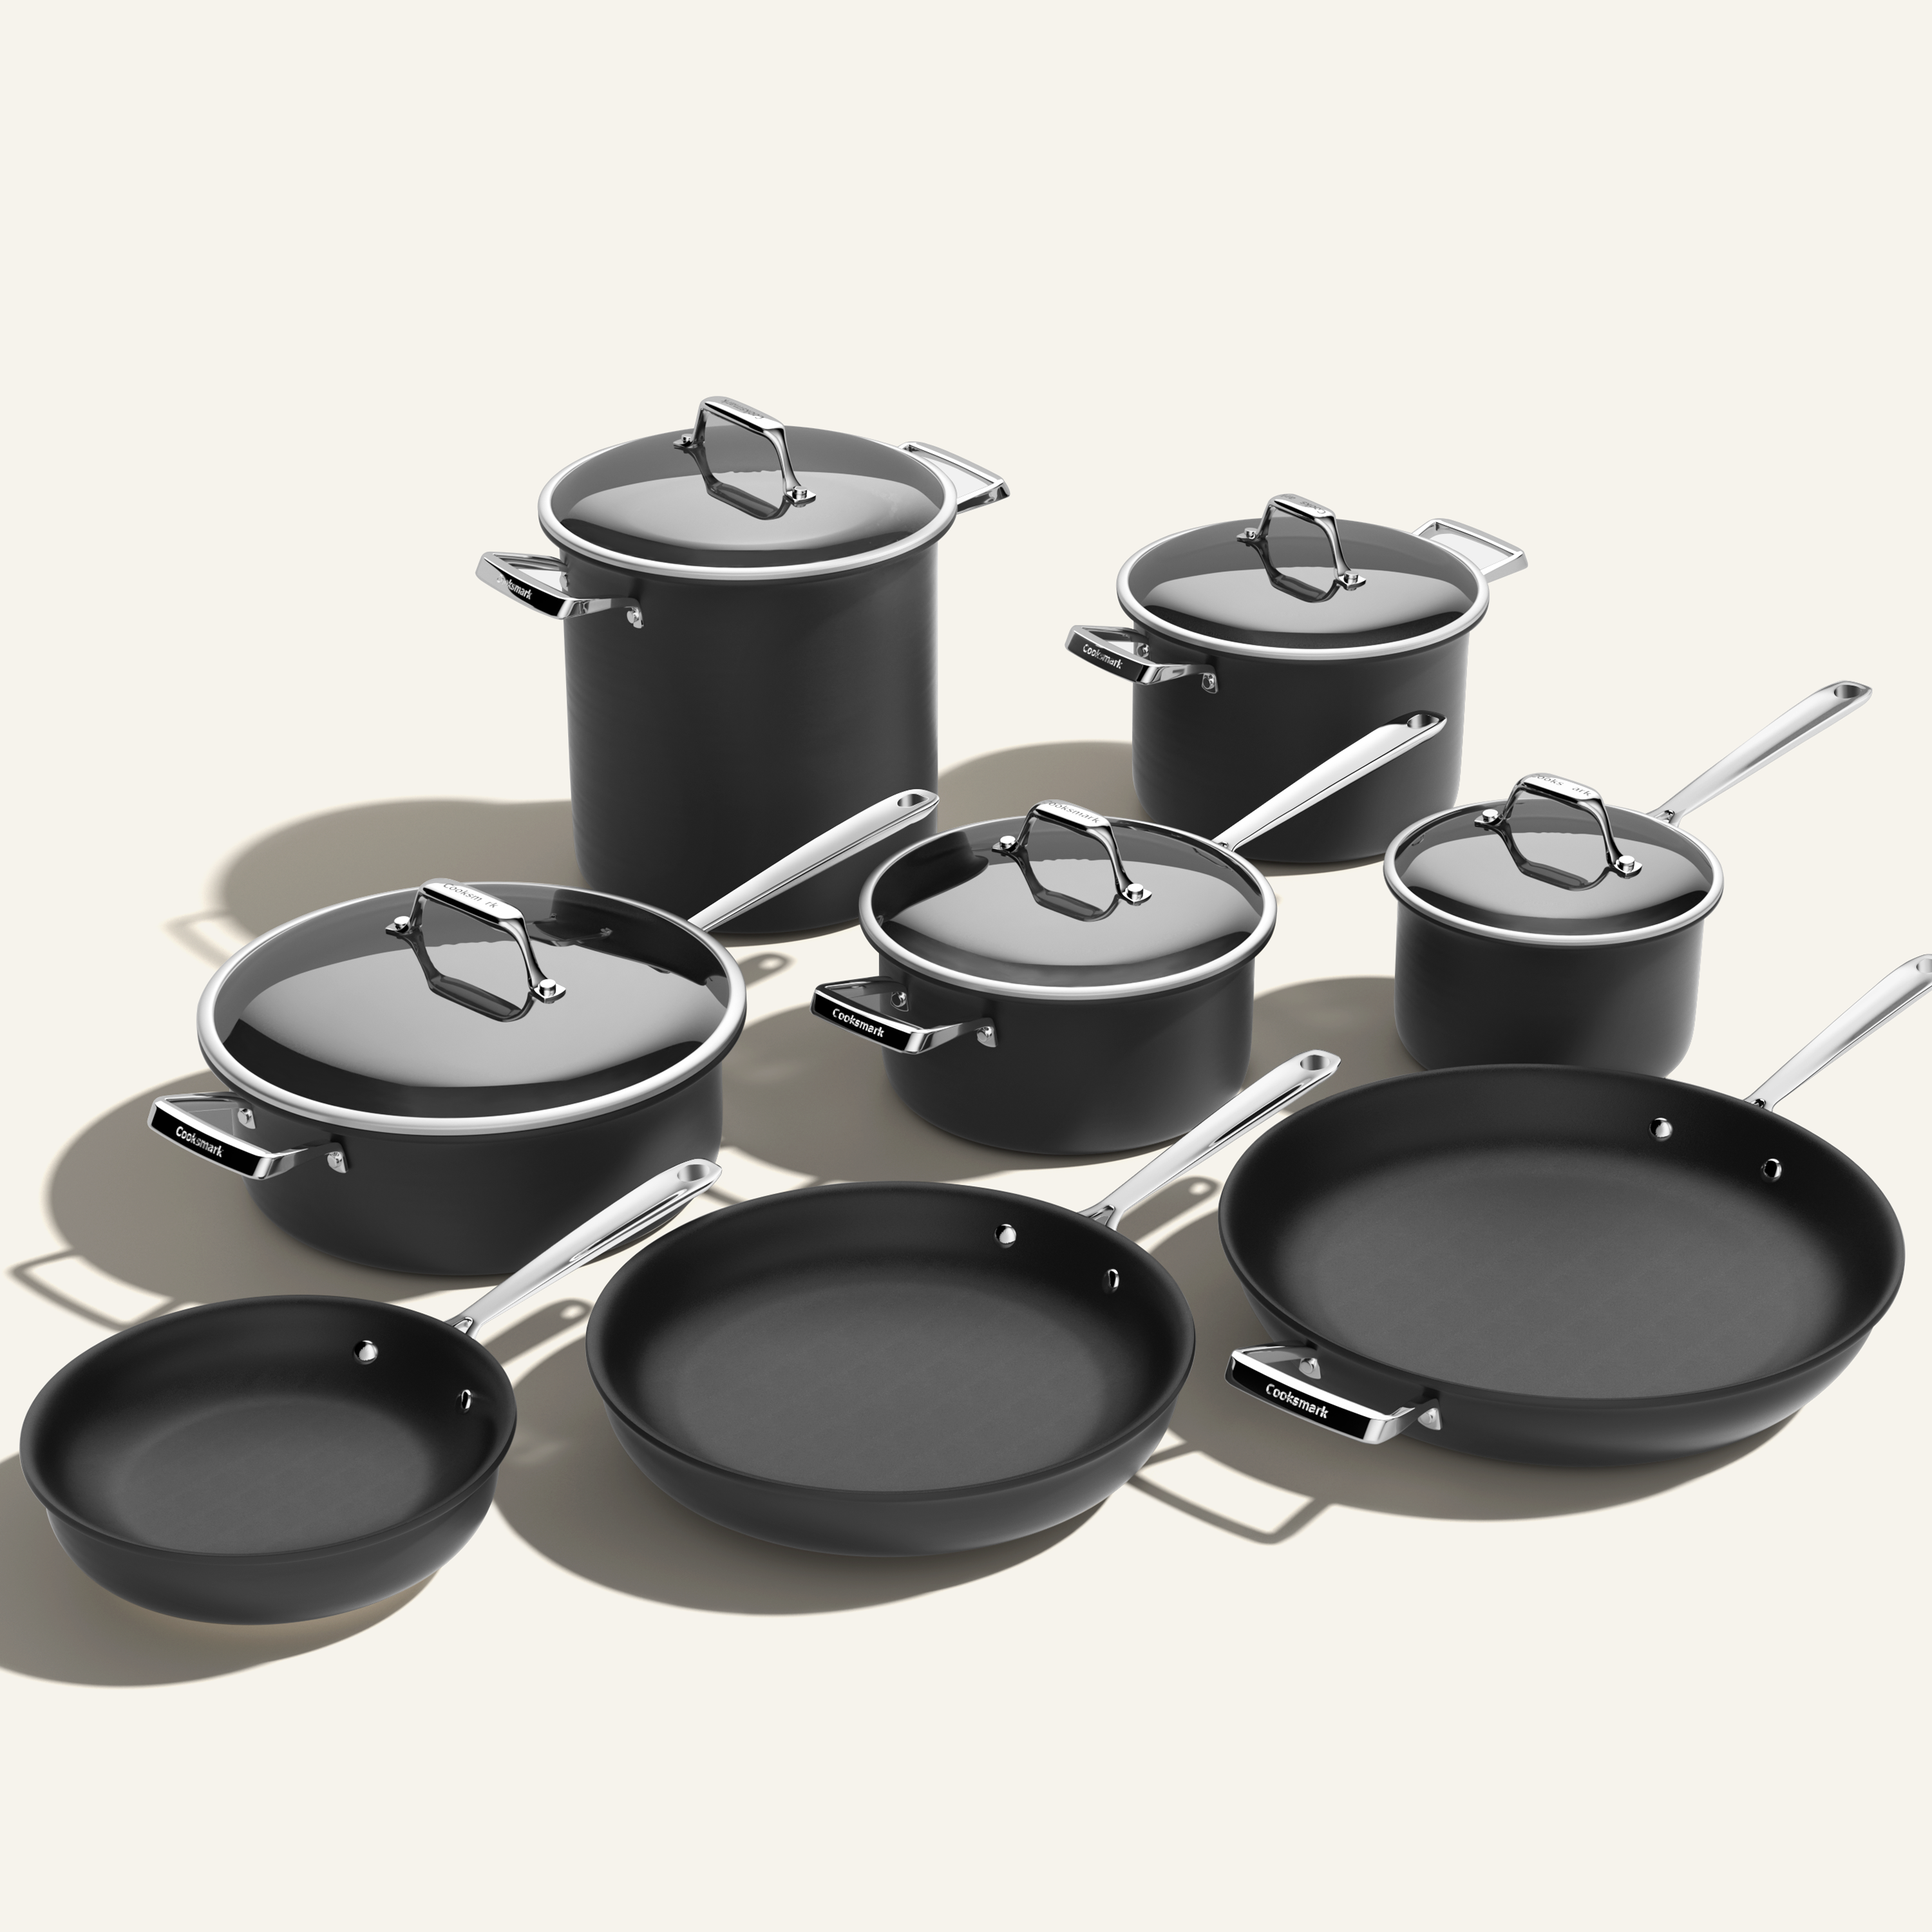 COOKSMARK Nonstick Ceramic Cookware Set, 10 Pieces White Pots and Pans Set  with Glass Lids & Stainless Steel Handles, Induction Cookware Set 